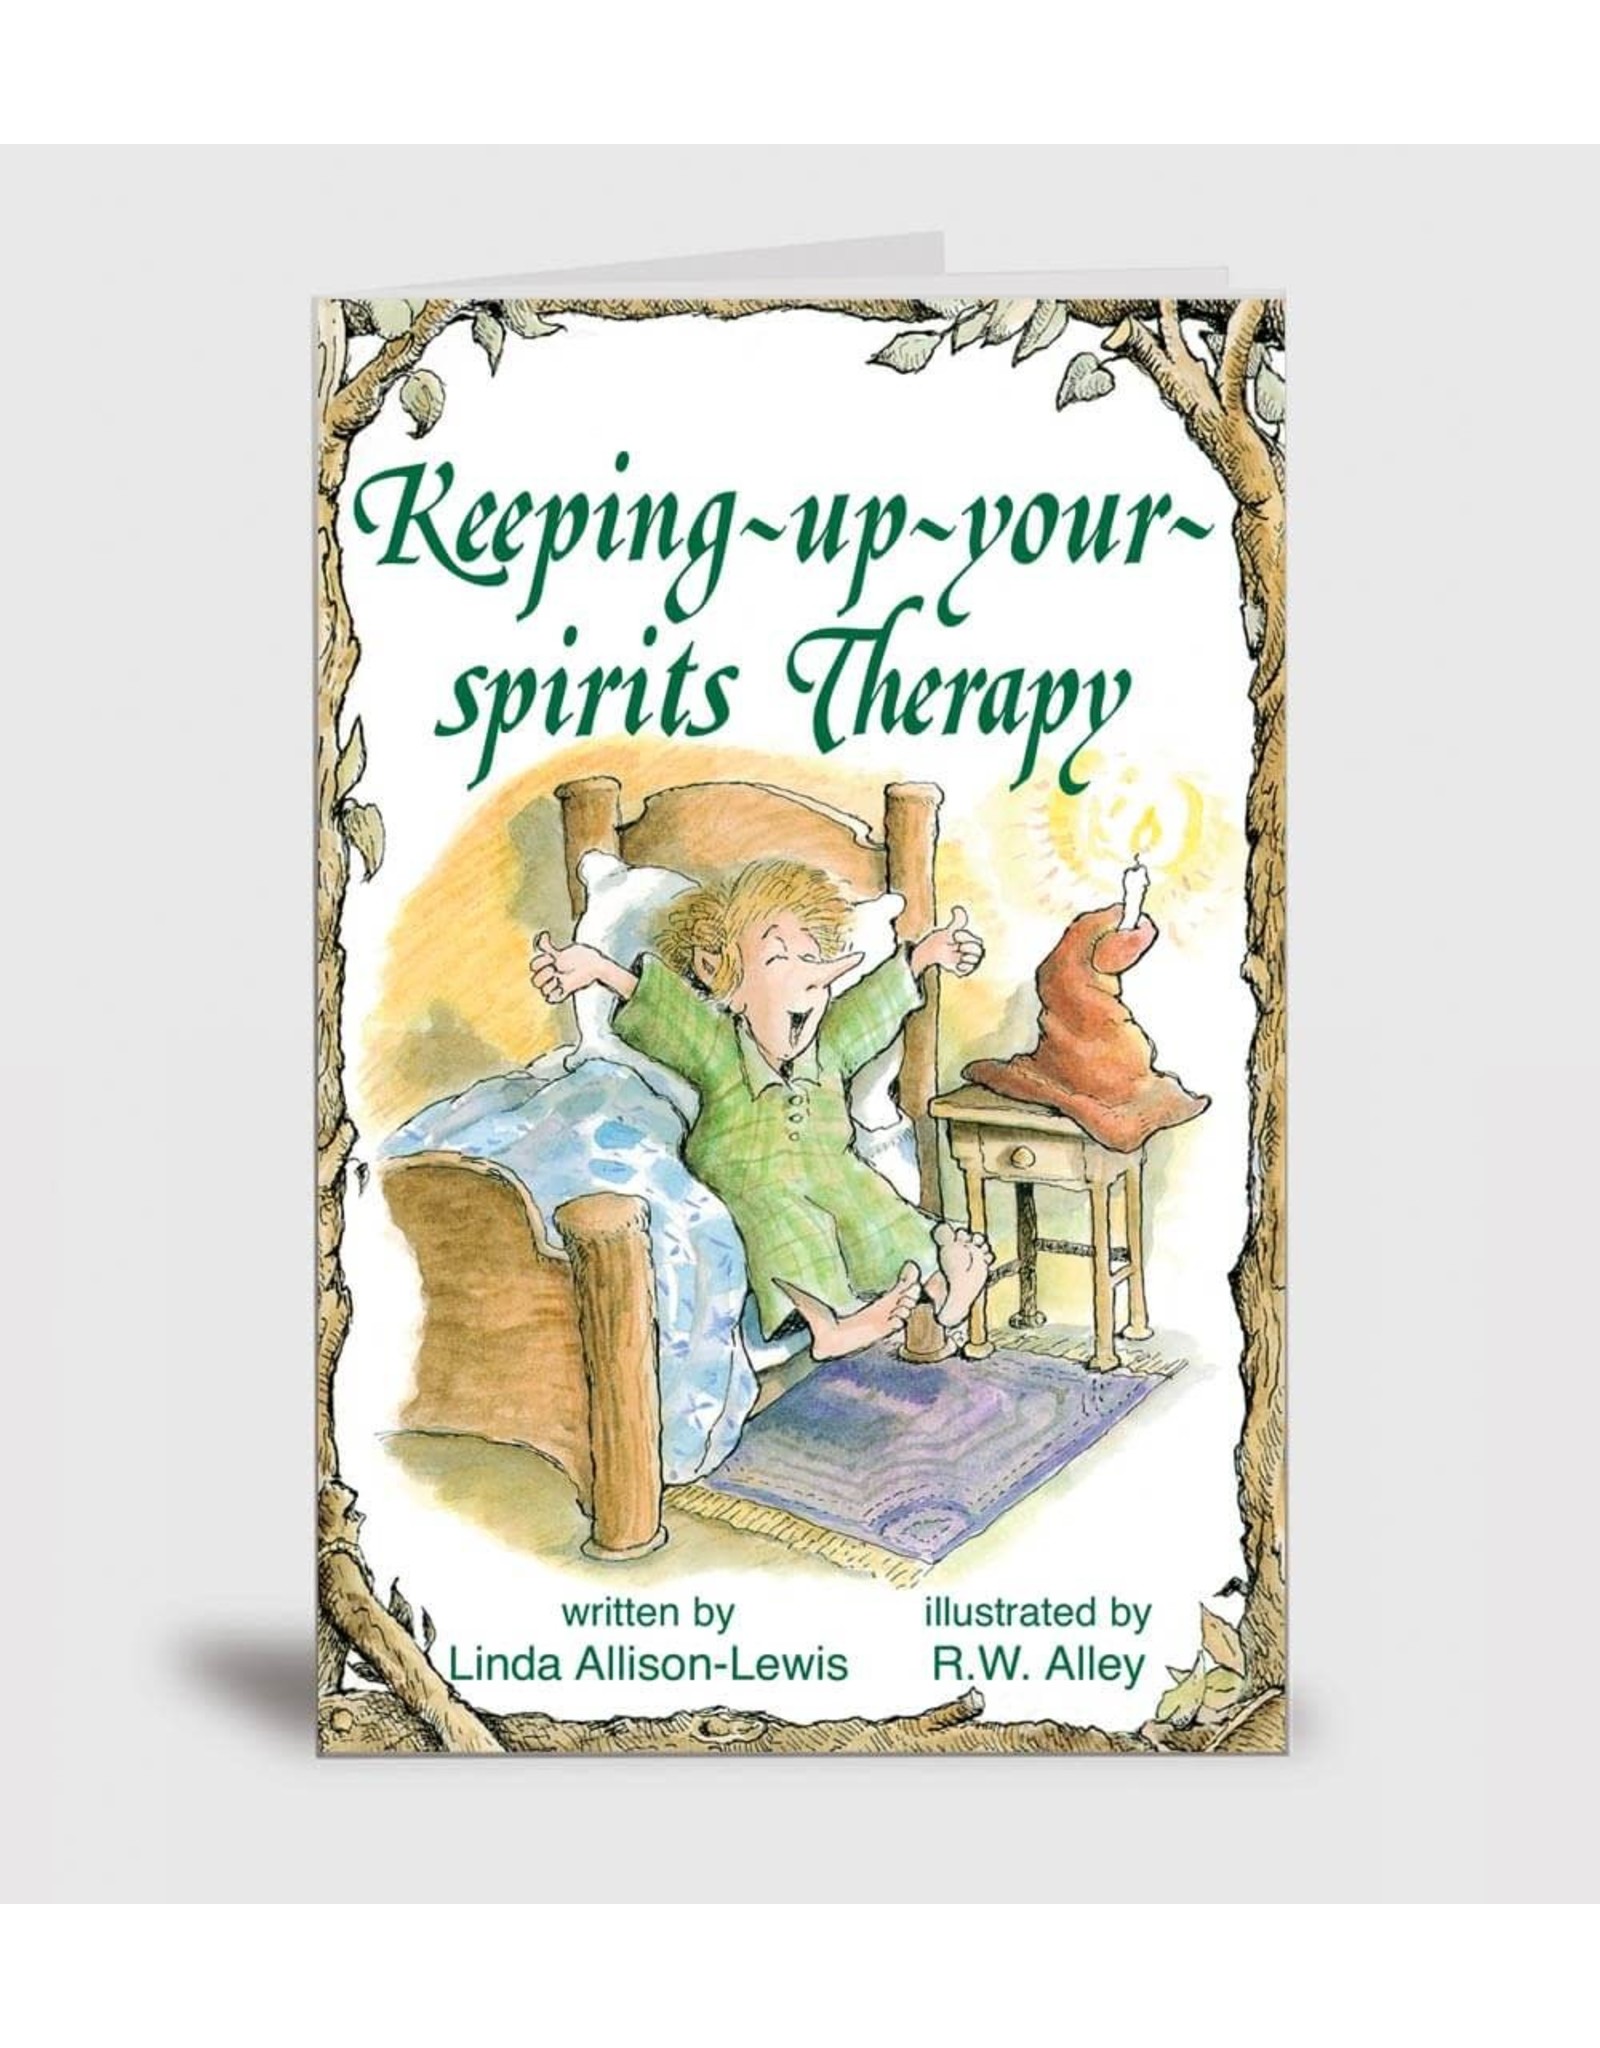 Elf Help Elf Help - Keeping-up-your-spirits Therapy